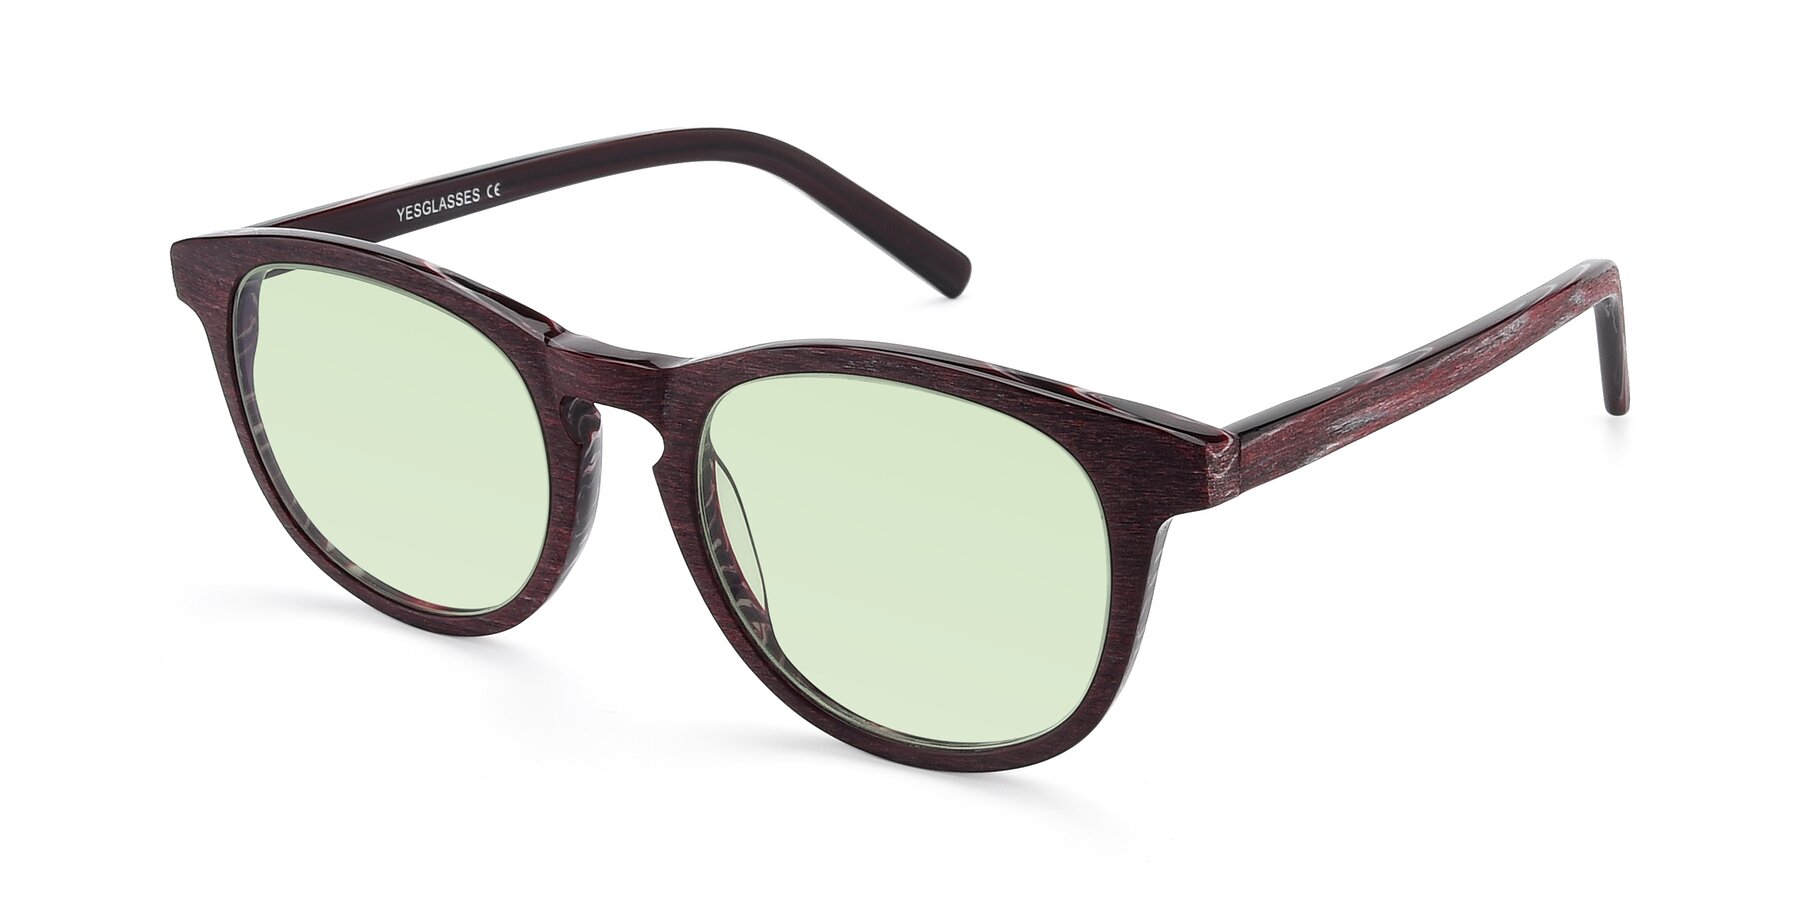 Angle of SR6044 in Wine-Wooden with Light Green Tinted Lenses